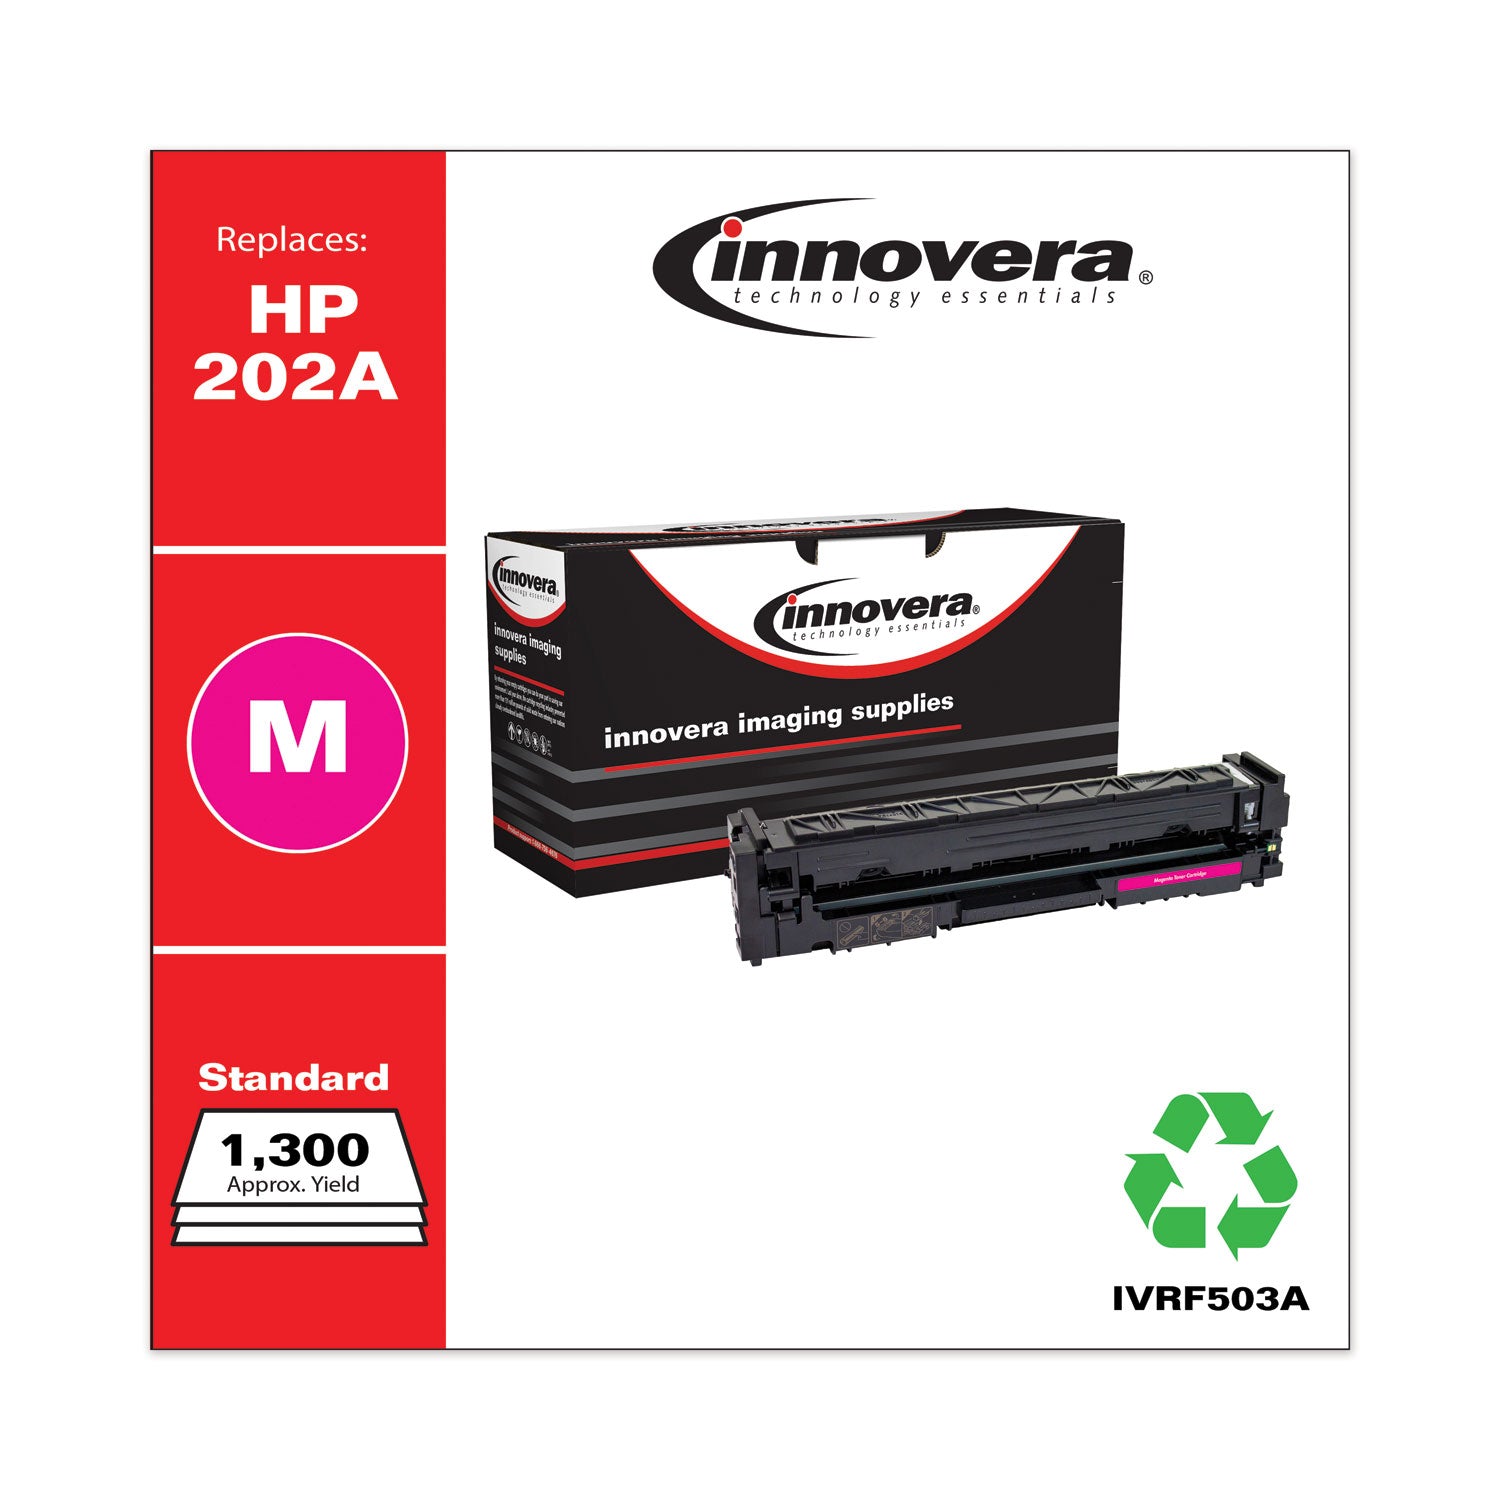 remanufactured-magenta-toner-replacement-for-202a-cf503a-1300-page-yield_ivrf503a - 2